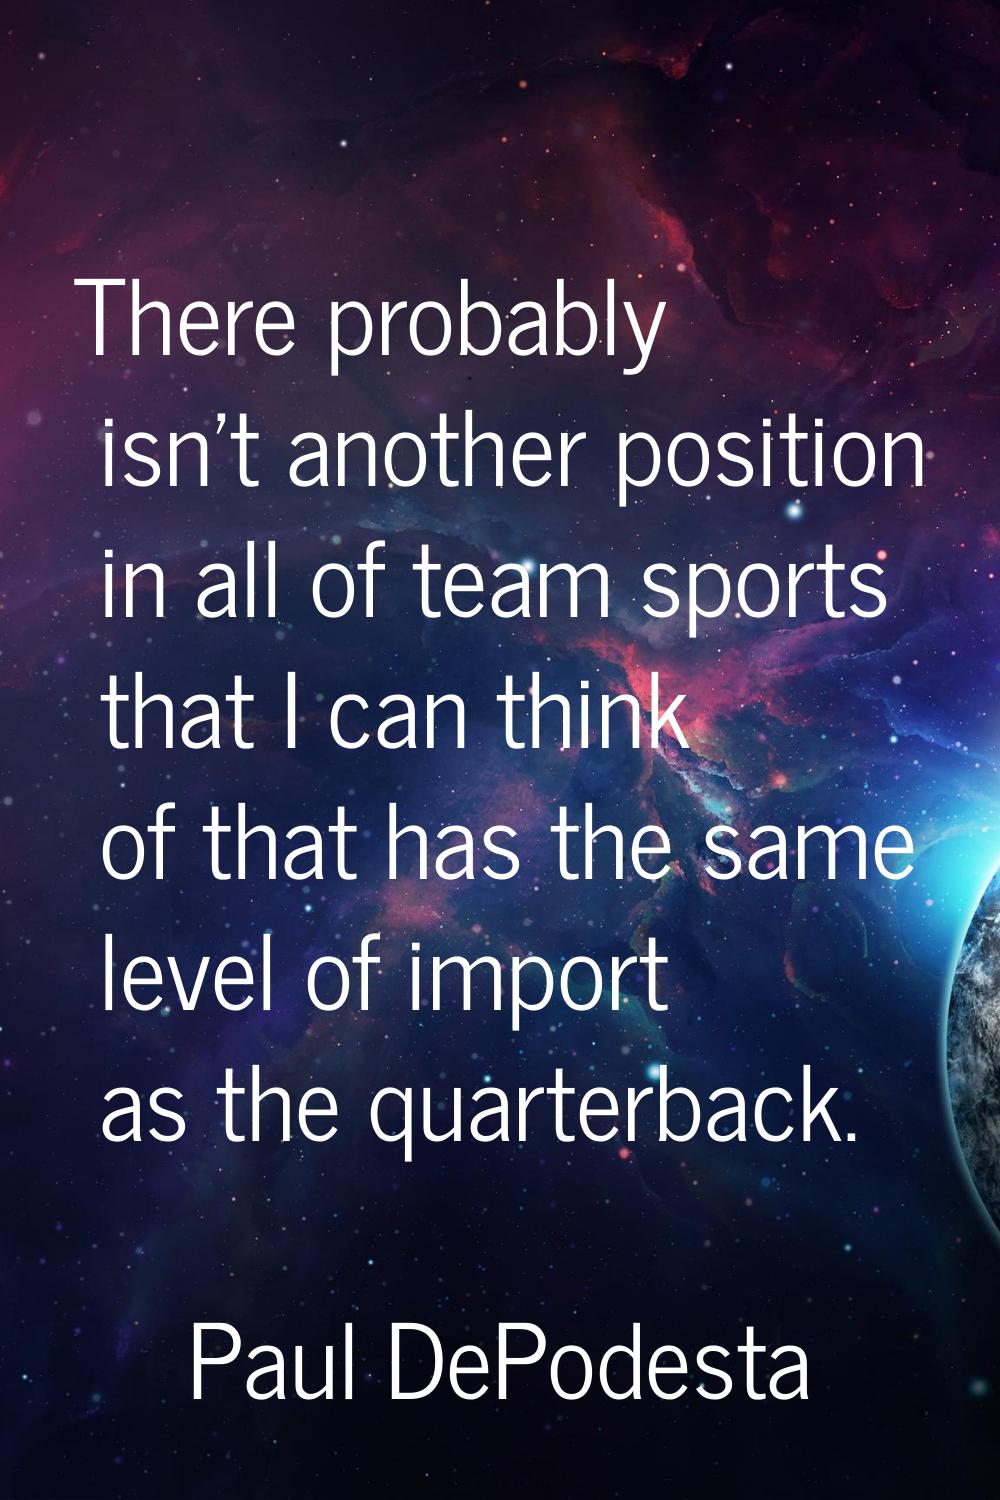 There probably isn't another position in all of team sports that I can think of that has the same l